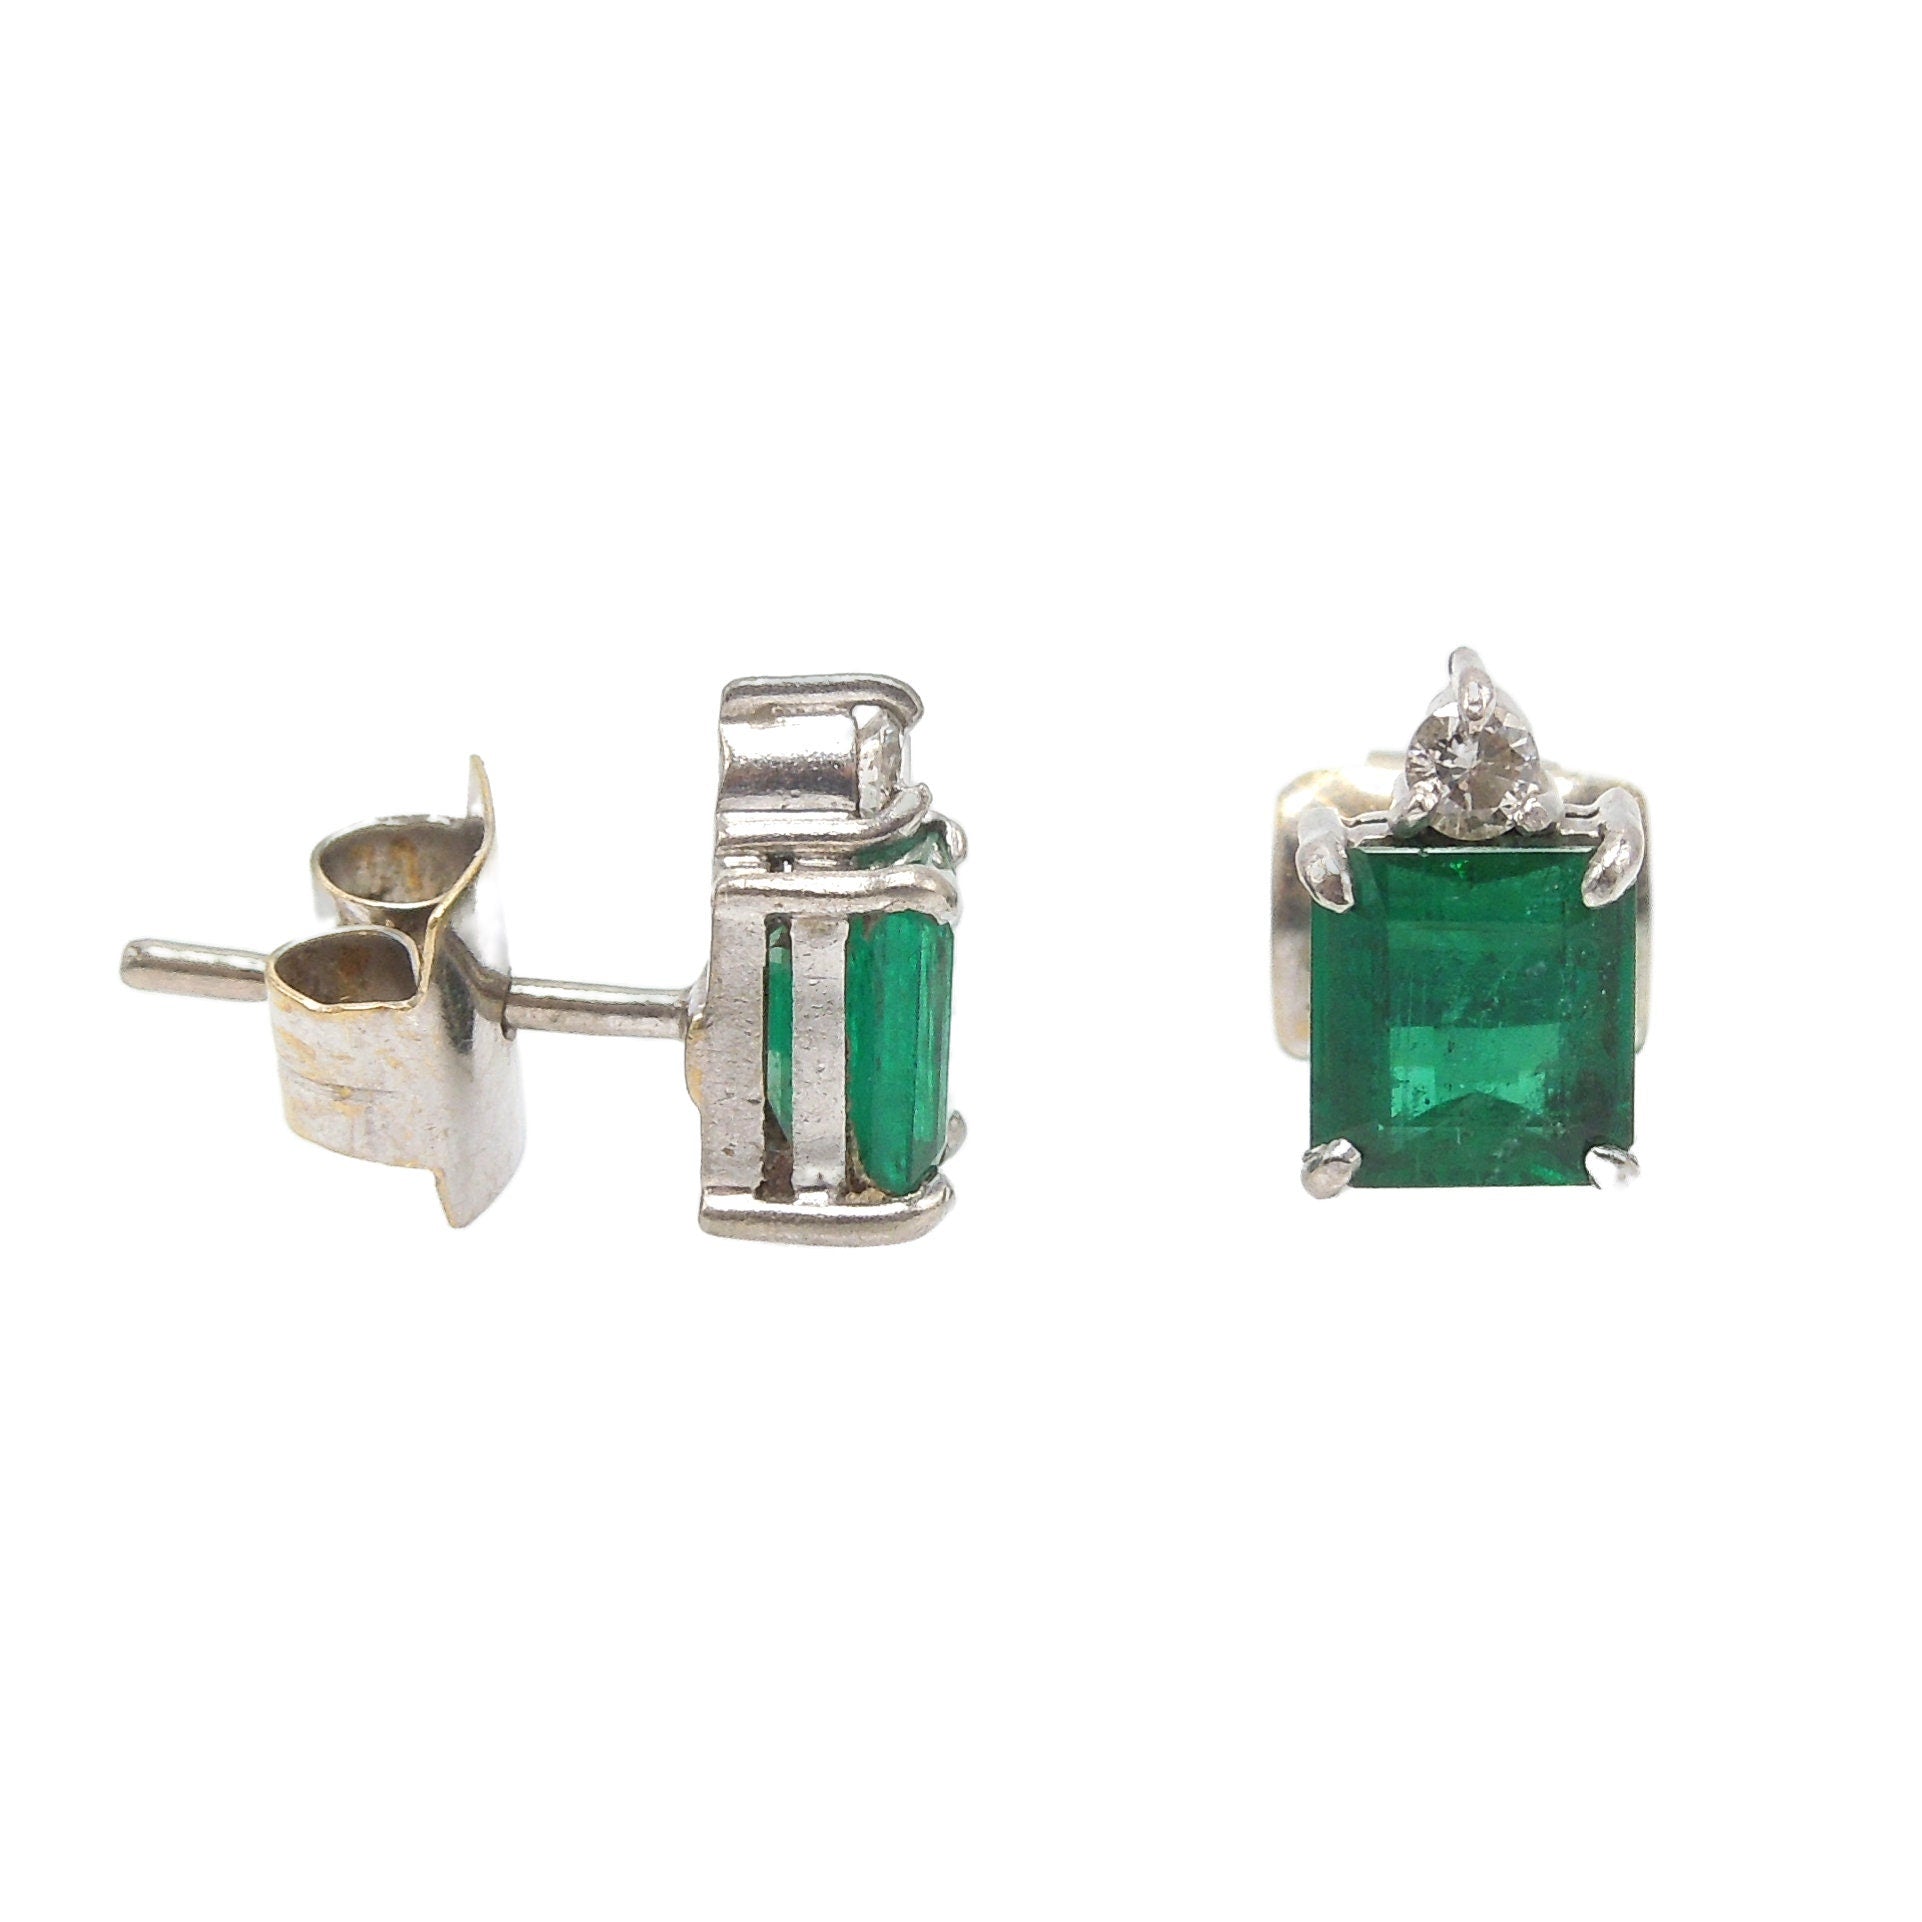 Vintage Diamond and Emerald Cut Emerald Stud Earrings in 18K White Gold